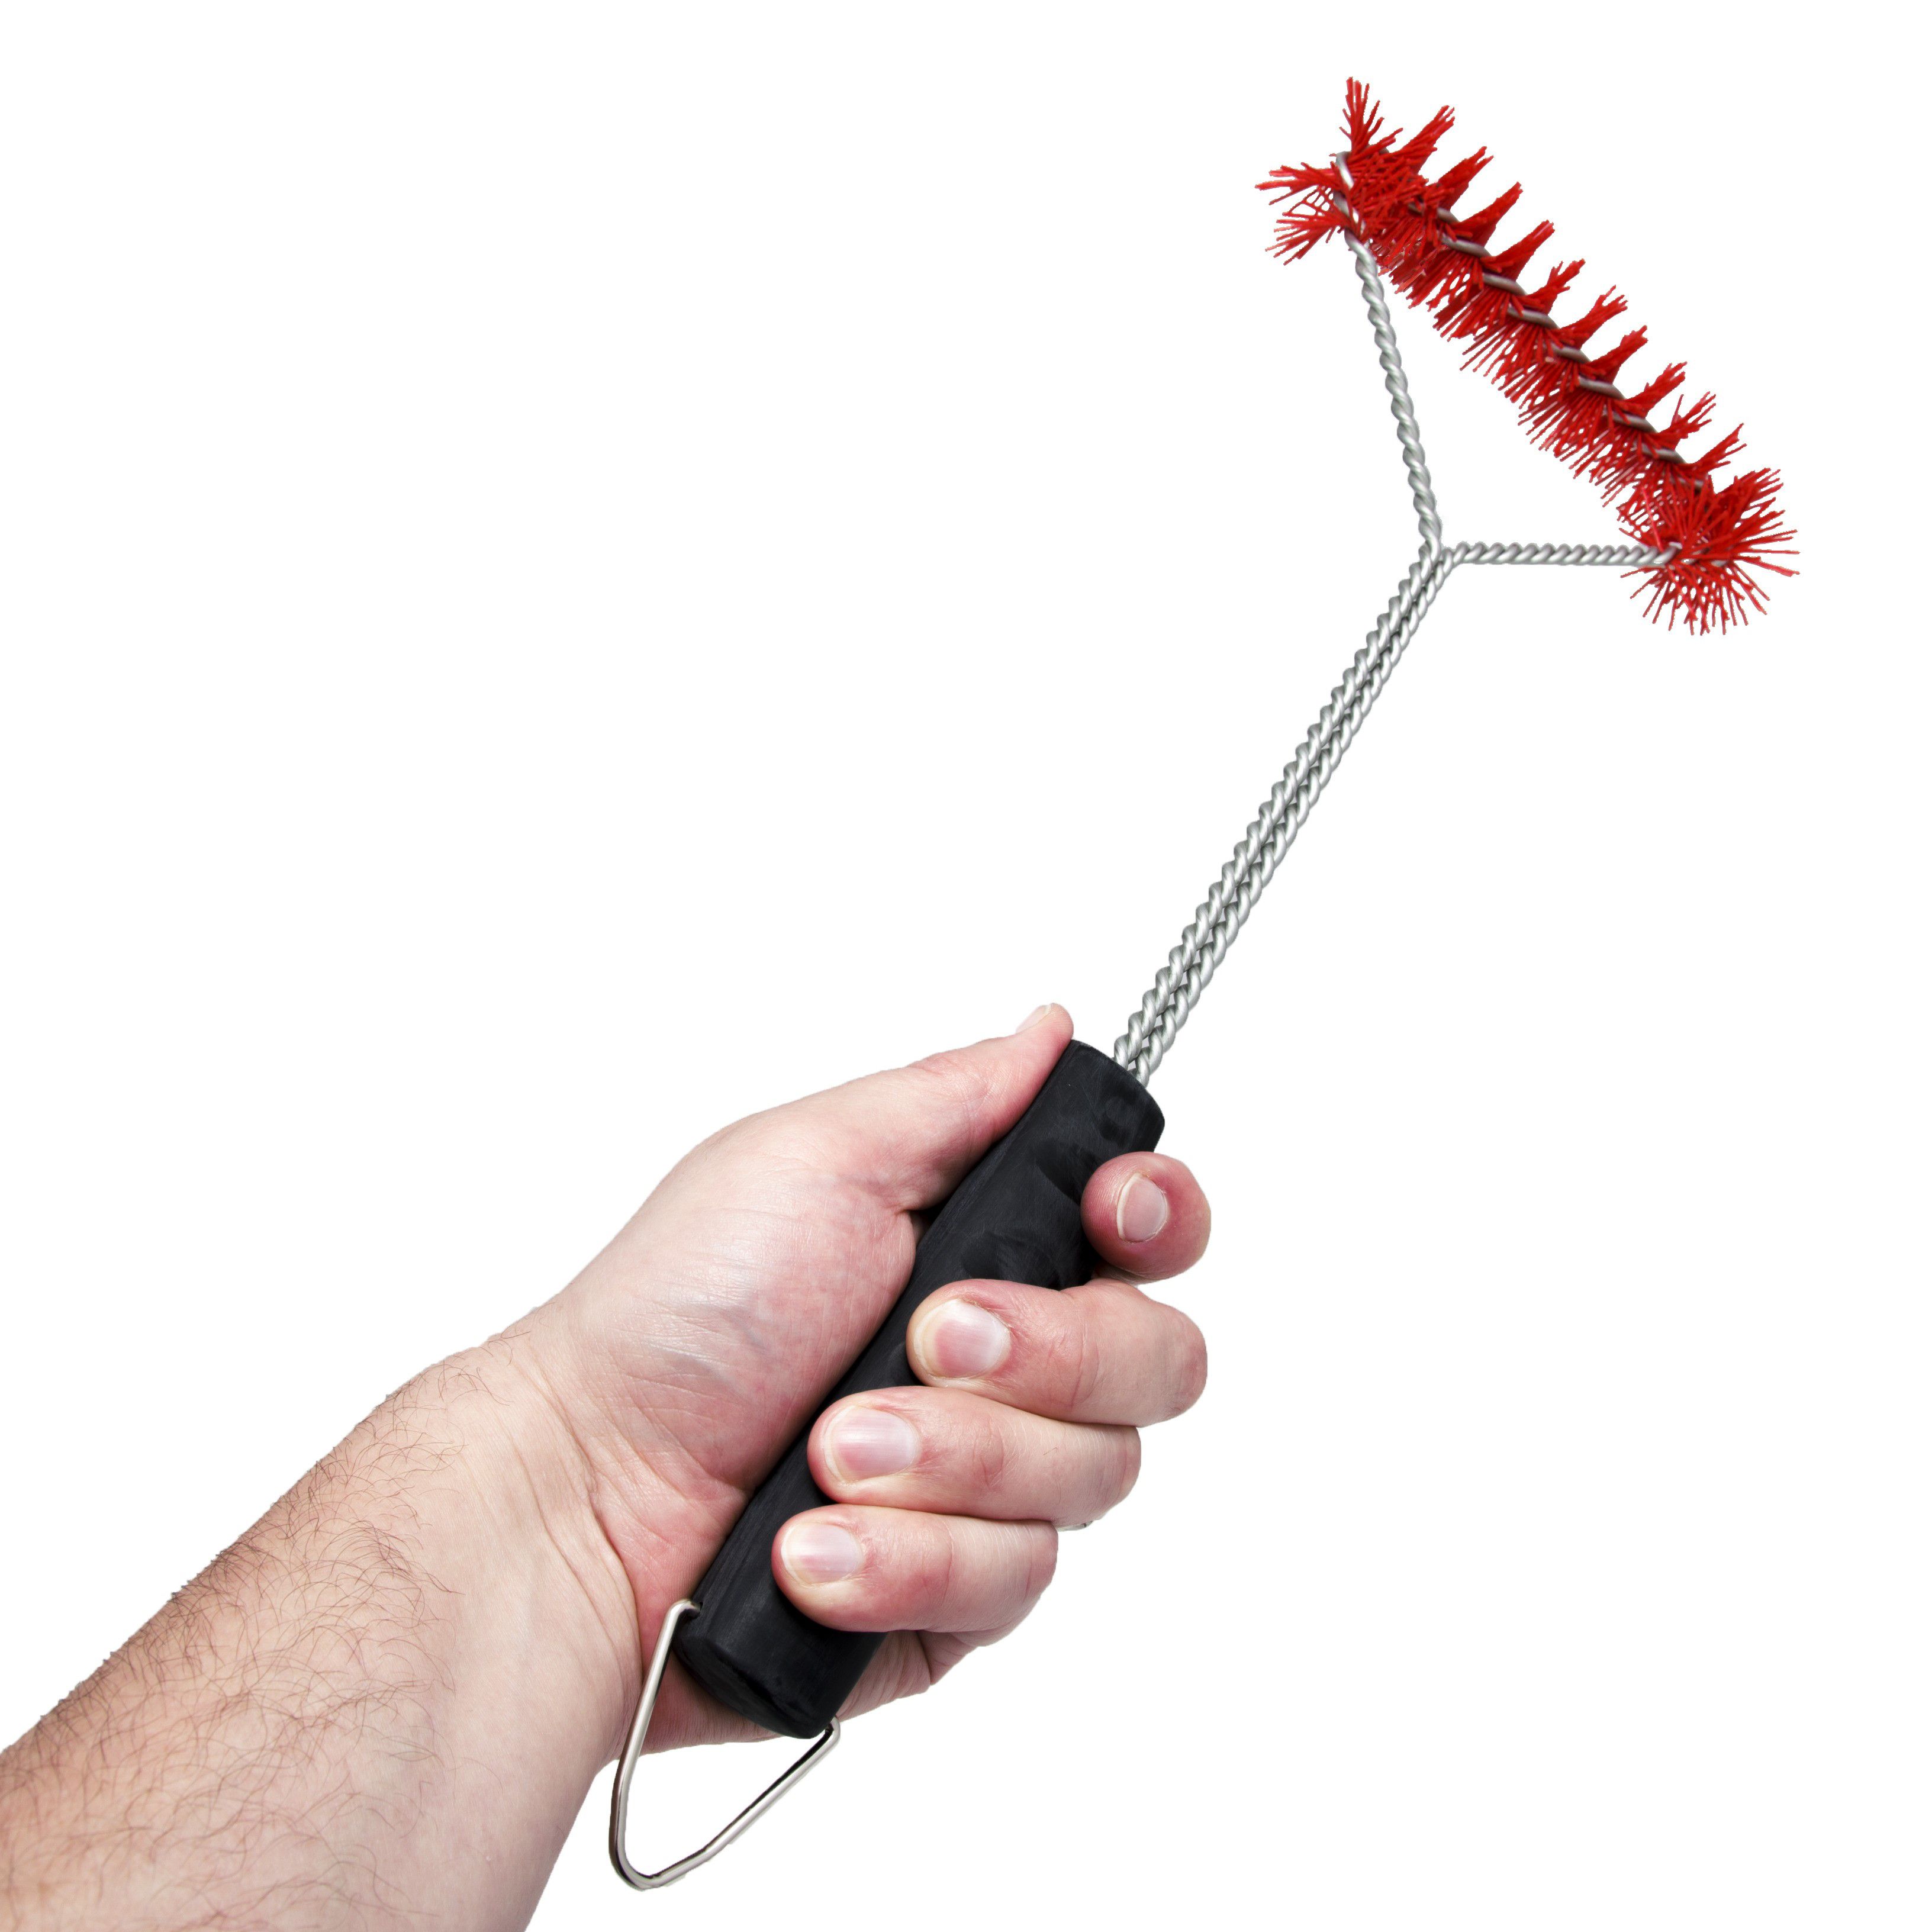 Charbroil Cool-Clean Black & red Grill cleaning brush